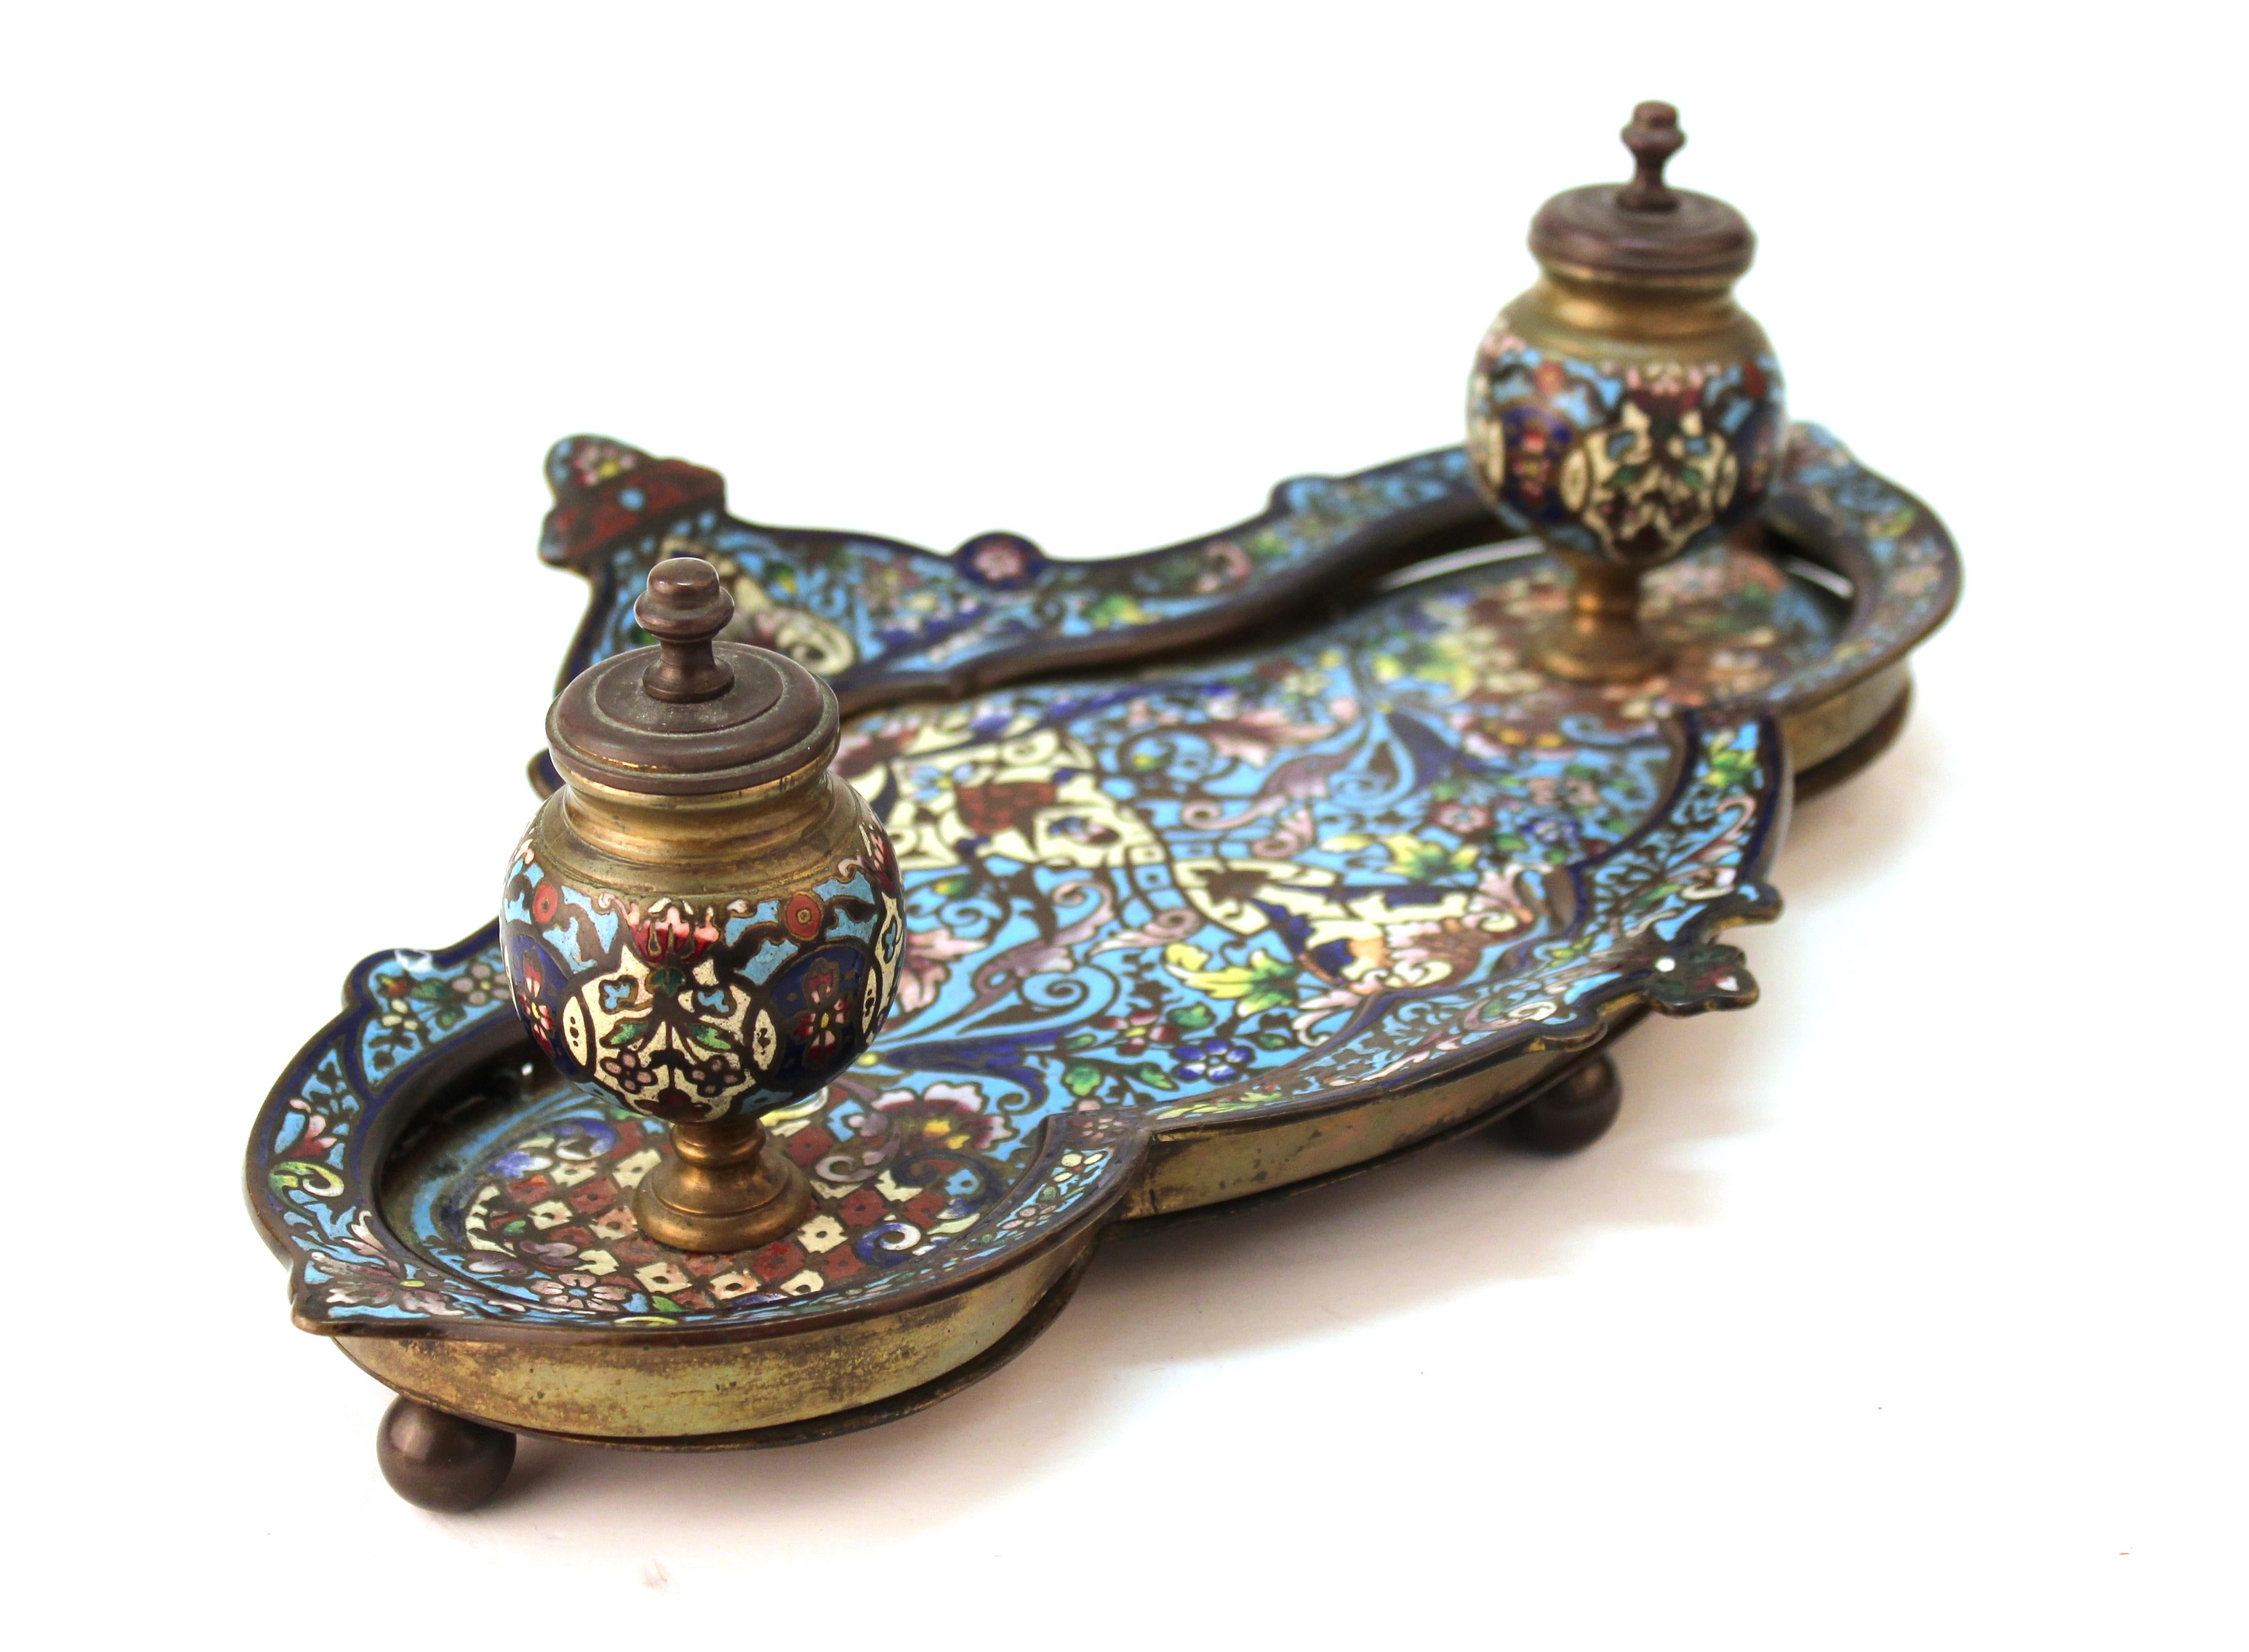 French 19th century Moorish style double inkwell and pen tray made in enameled champlevé bronze with ornate and colorful floral and foliage enameling to the tray and the bodies of the inkwells. Made in France, circa 1850s. The tray bottom is warping